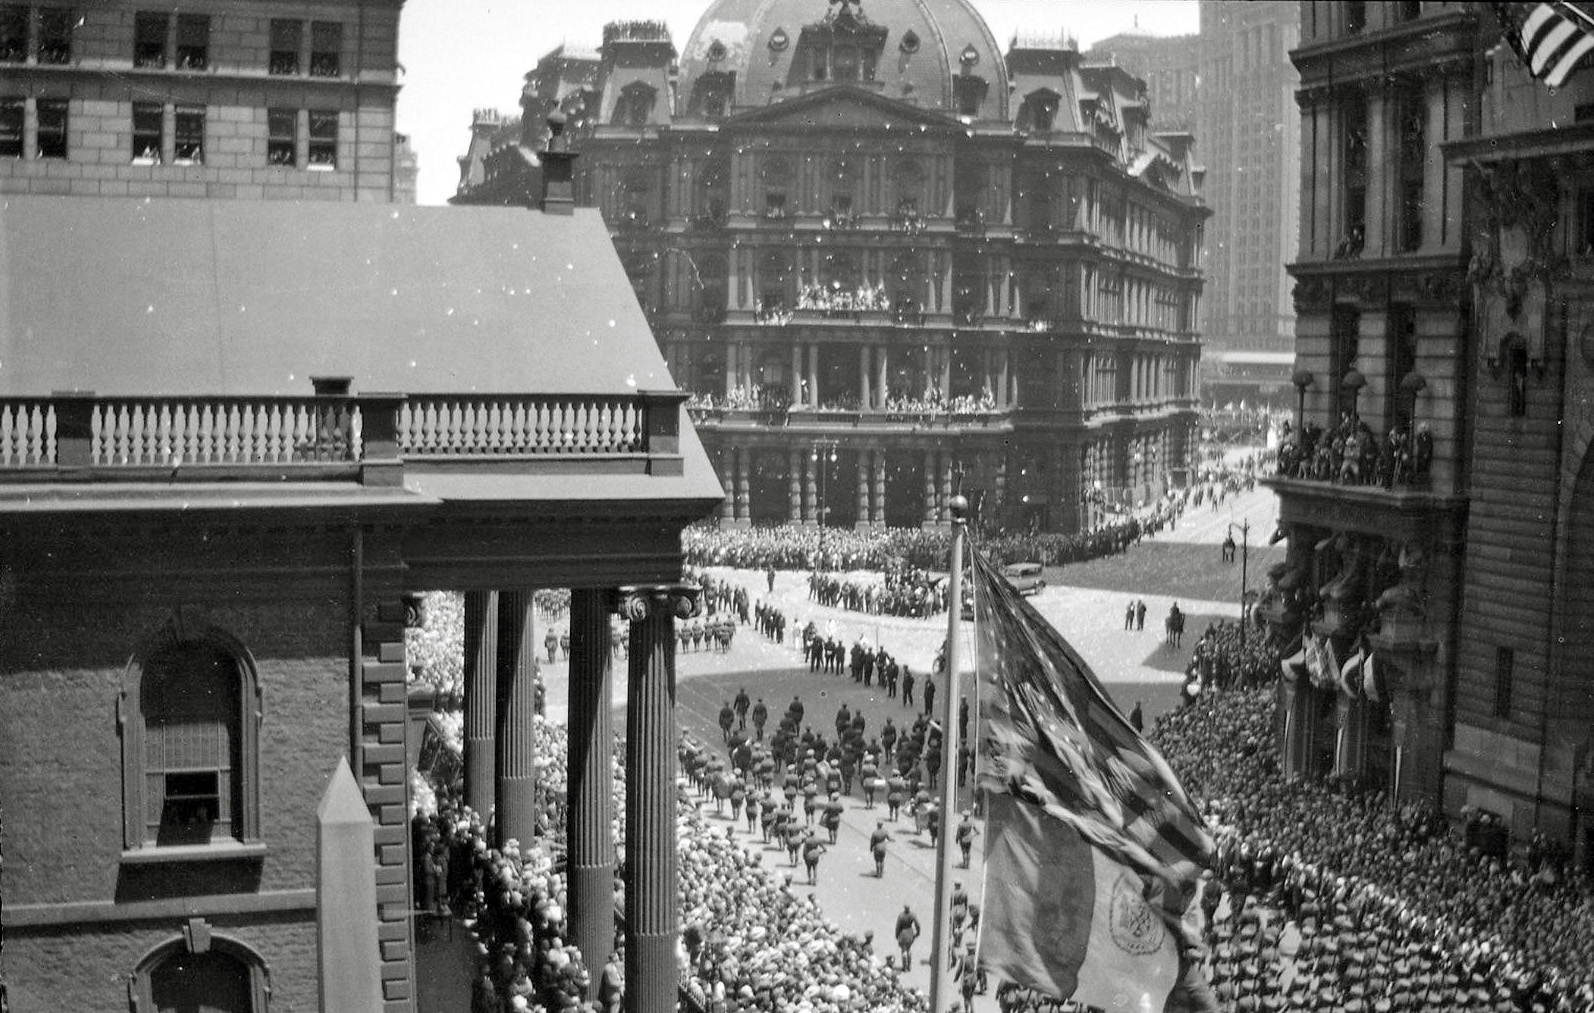 Parade in New York City in the 1920s. The building in back is the old courthouse and post office, at the time referred to as Mullet's Monstrosity. Torn down in 1939, it was located on Broadway right by City Hall. First of five shots of the parade in an envelope of negatives I bought recently. View full size.